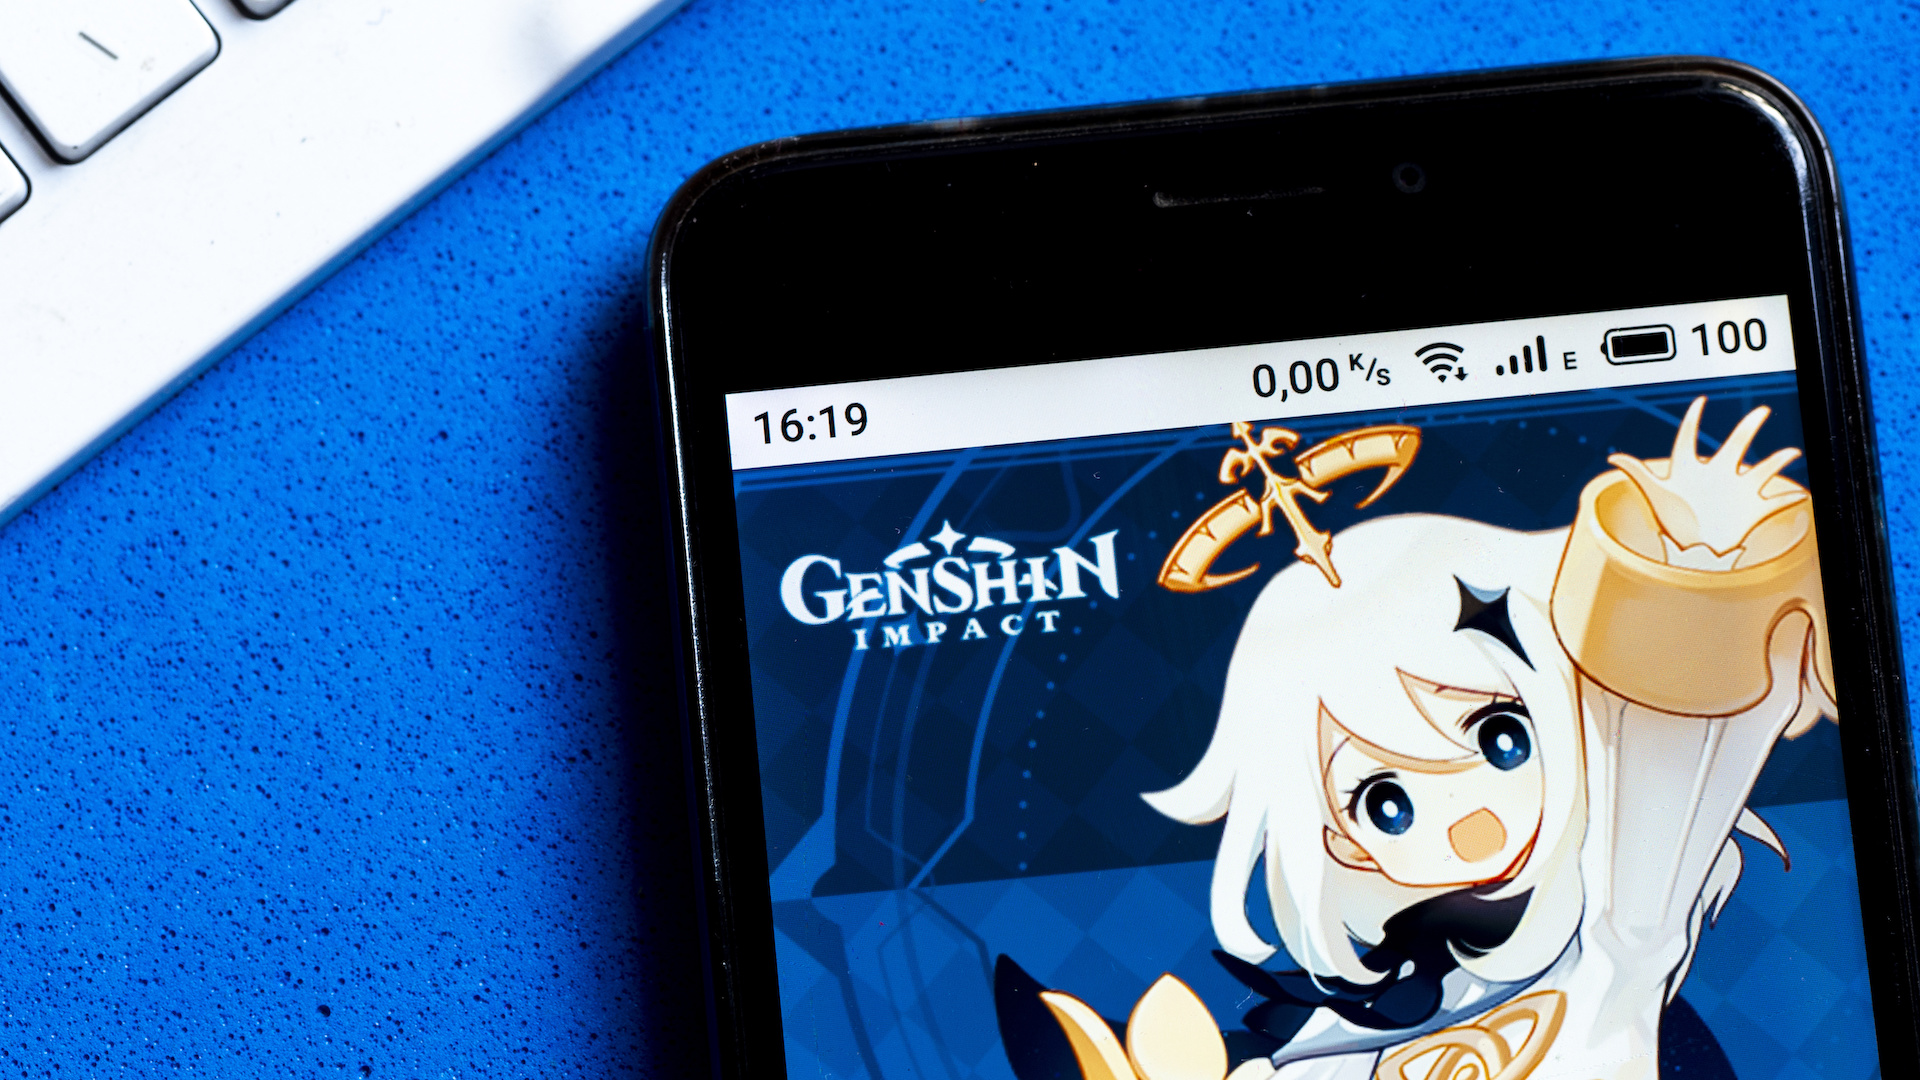 A Genshin Impact app by miHoYo Limited logo is seen displayed on a smartphone.